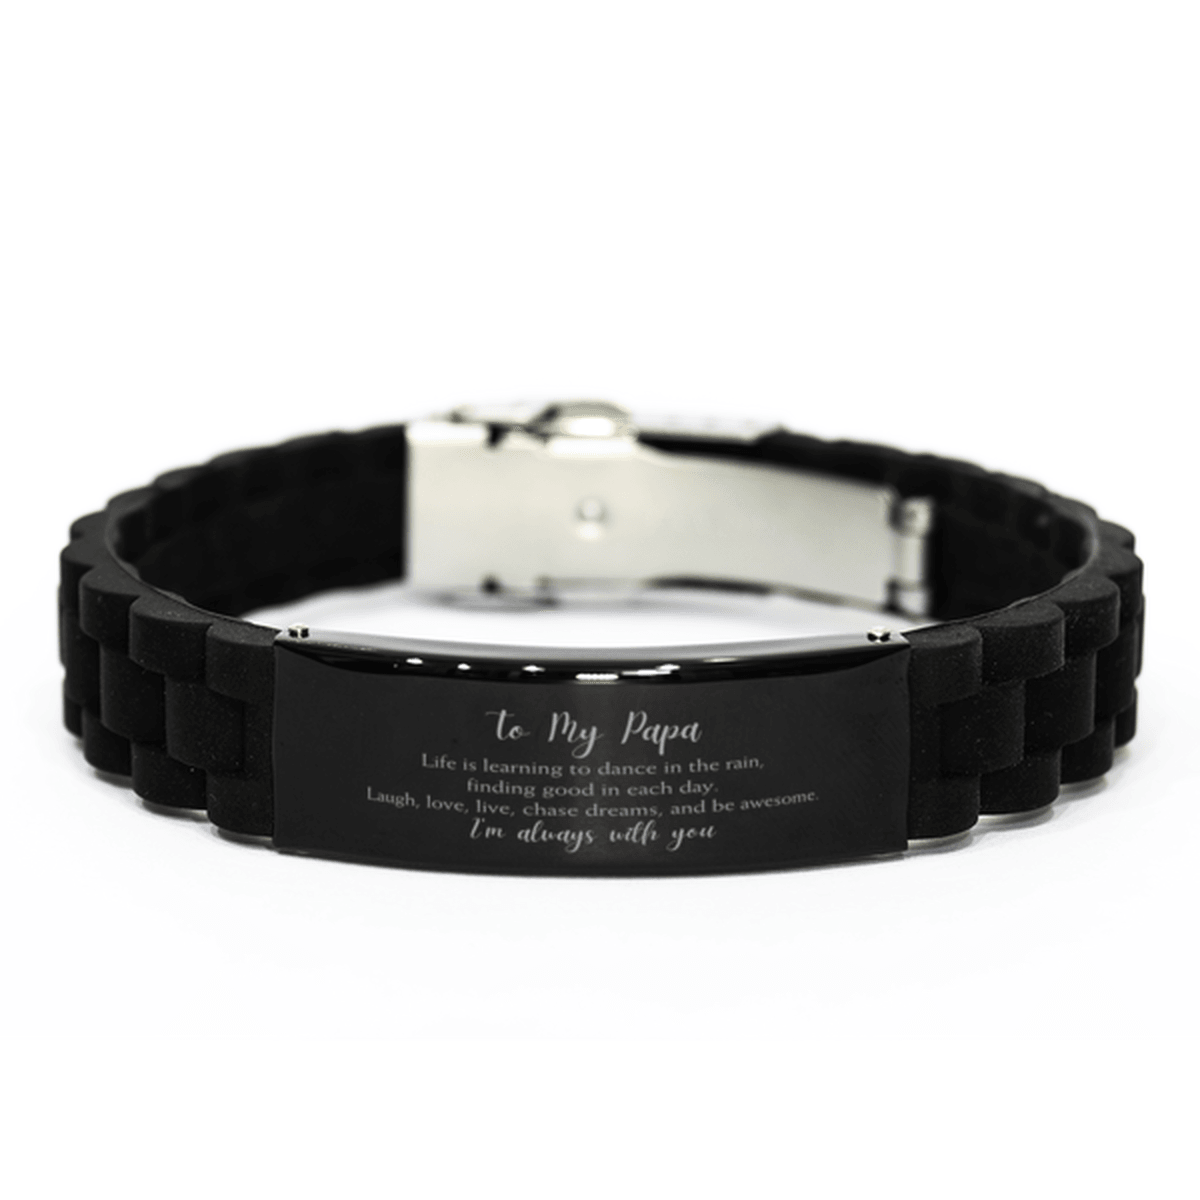 Papa Christmas Perfect Gifts, Papa Black Glidelock Clasp Bracelet, Motivational Papa Engraved Gifts, Birthday Gifts For Papa, To My Papa Life is learning to dance in the rain, finding good in each day. I'm always with you